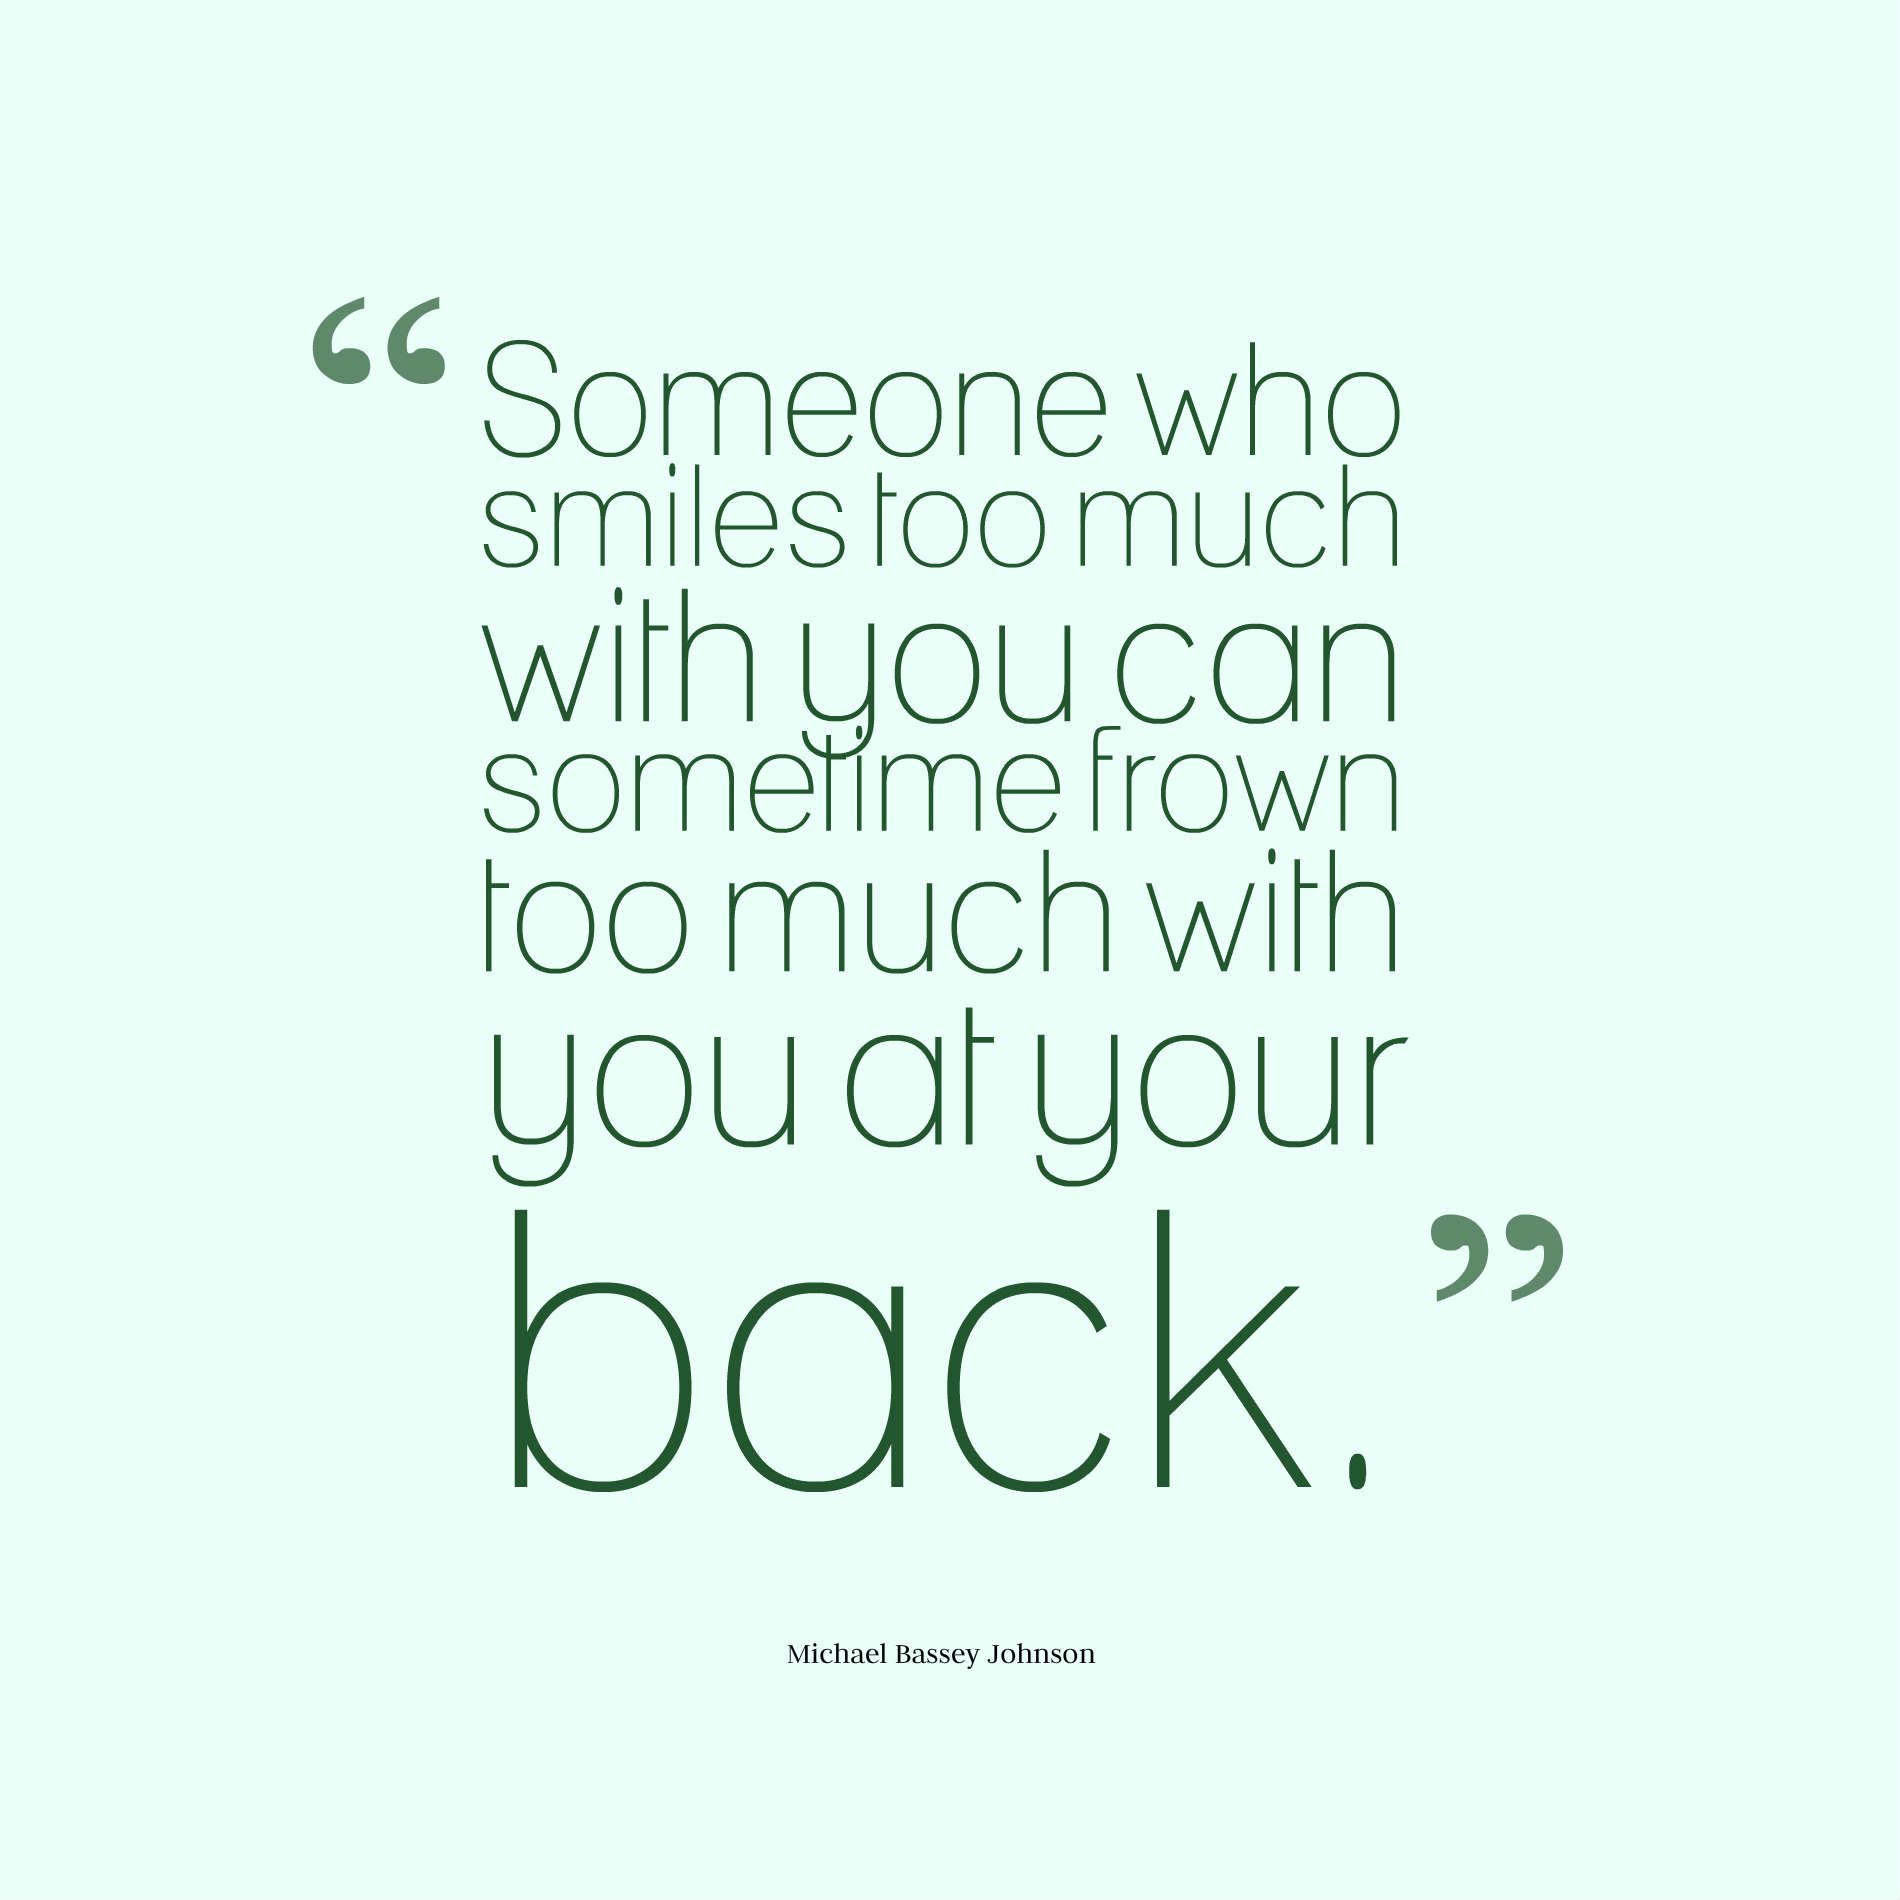 Someone who smiles too much with you can sometime frown too much with you at your back.